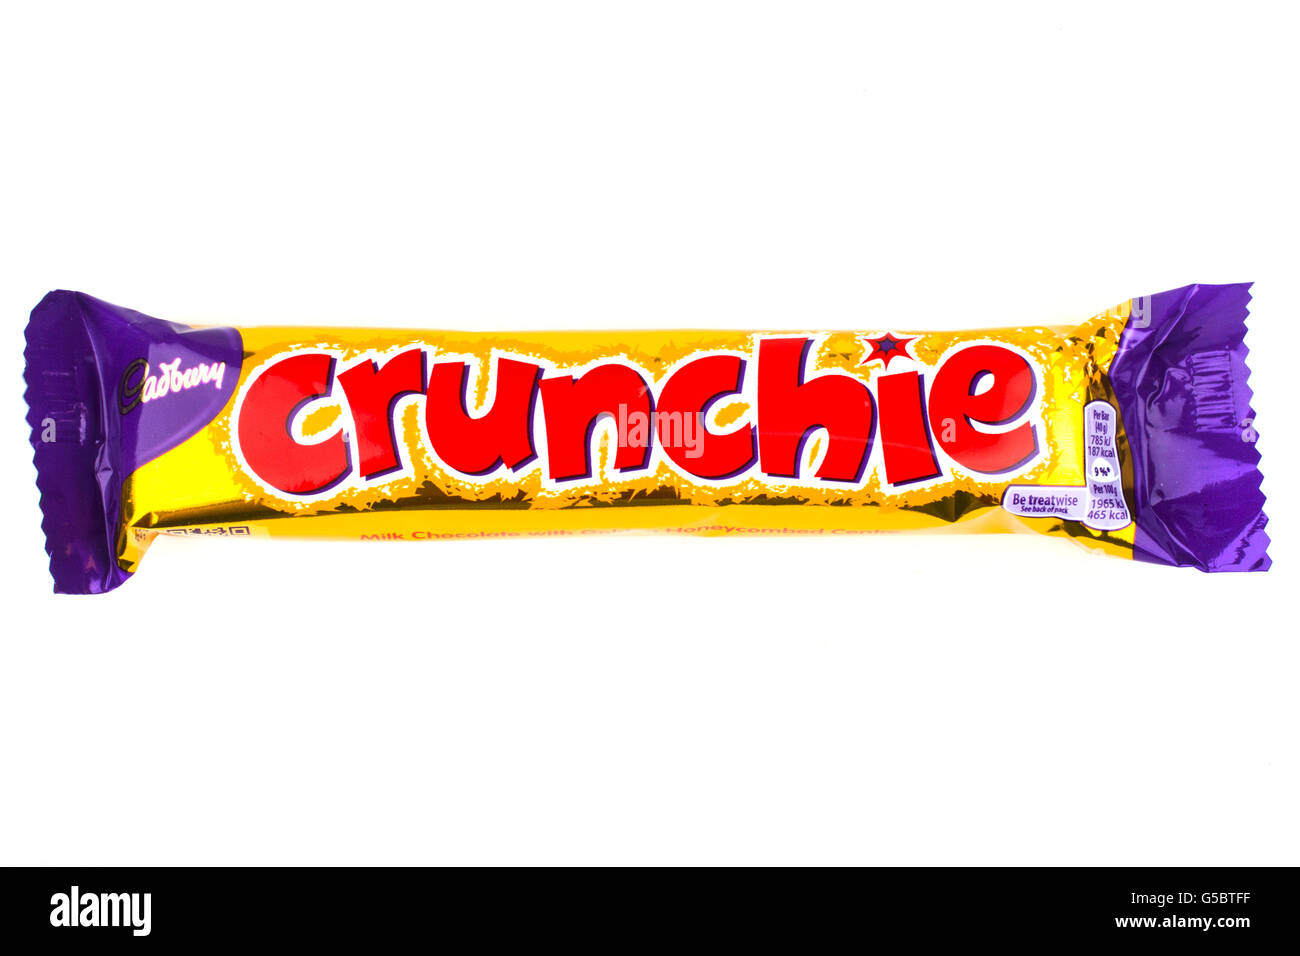 LONDON, UK - JUNE 16TH 2016: An unopened Crunchie chocolate bar manufactured by Cadbury, pictured over a plain white background Stock Photo